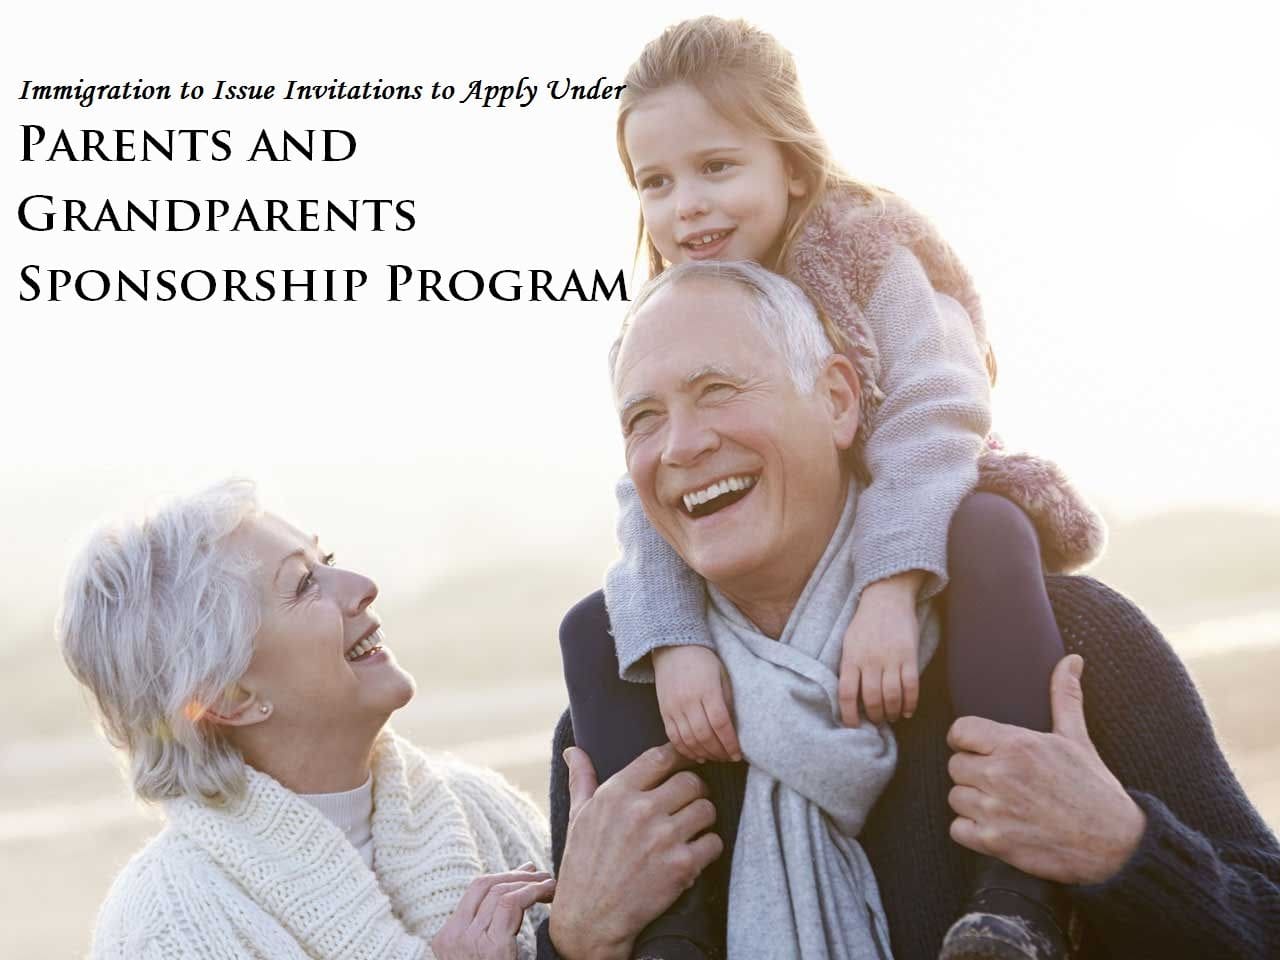 Immigration-to-Issue-Invitations-to-Apply-Under-Parents-and-Grandparents-Sponsorship-Program.jpg